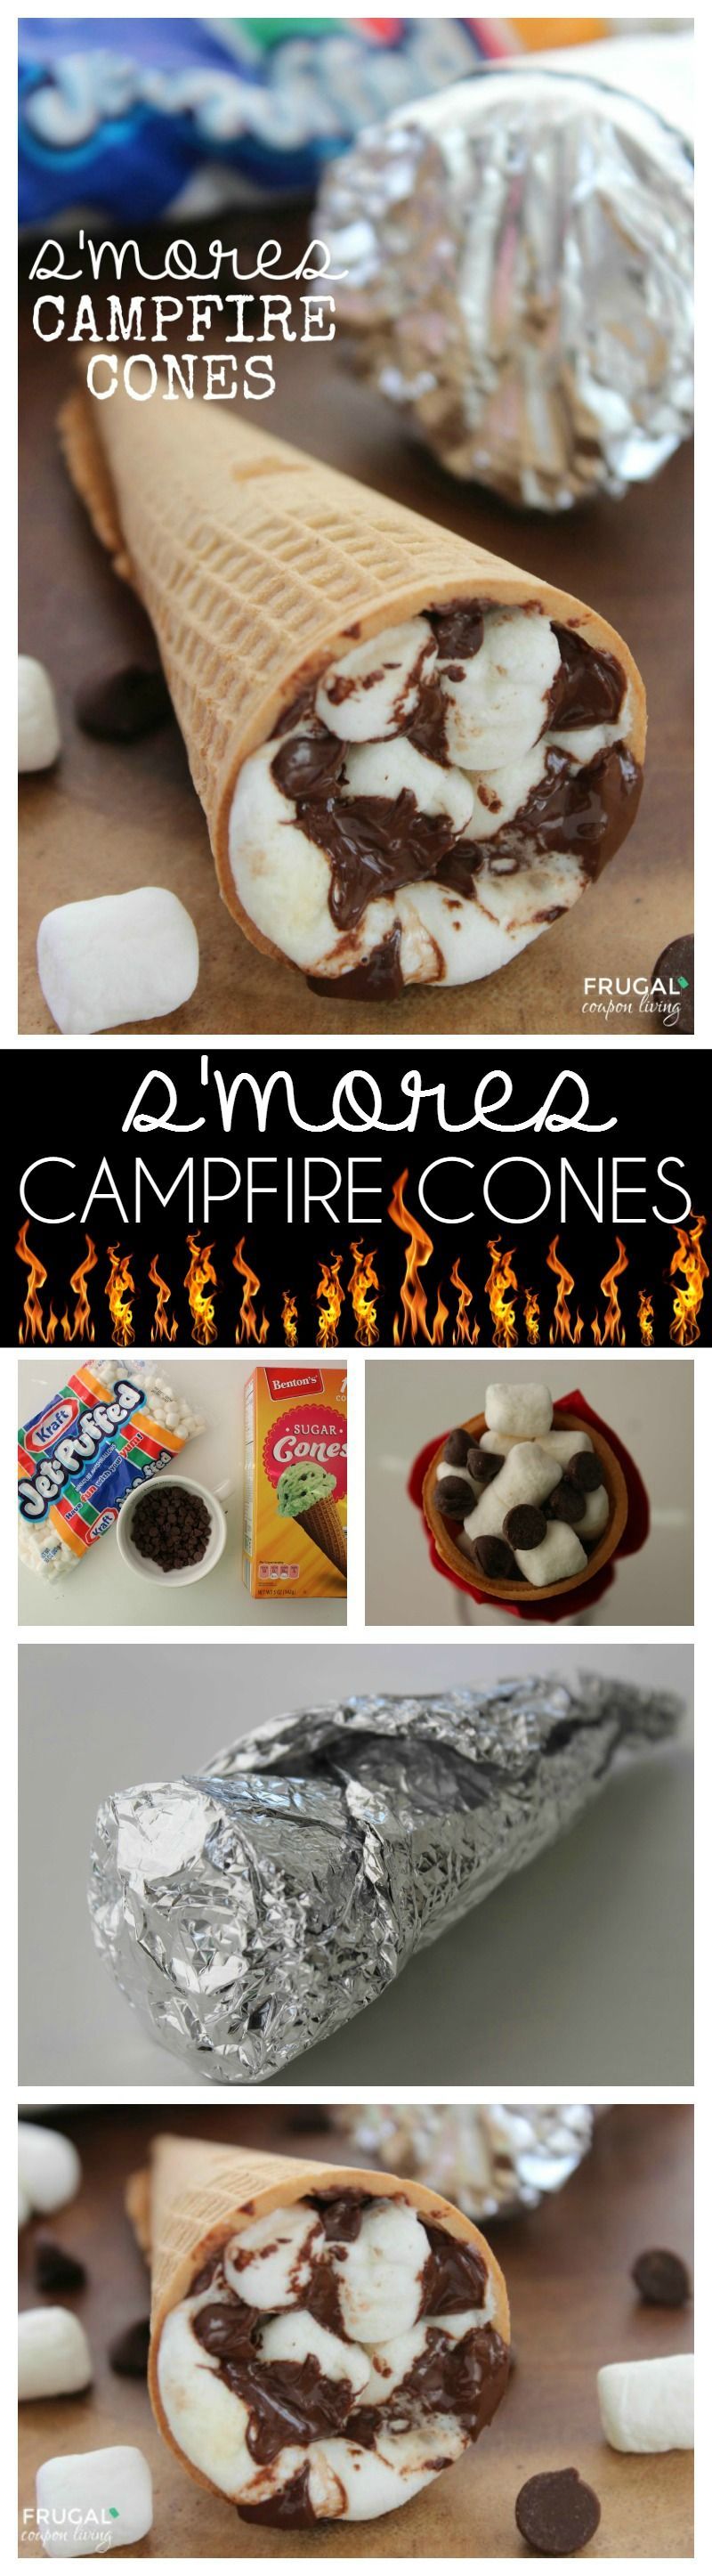 Smores Campfire Cones – this campfire recipe goes outside the box and creates the ultimate smores recipe for adults and kids on